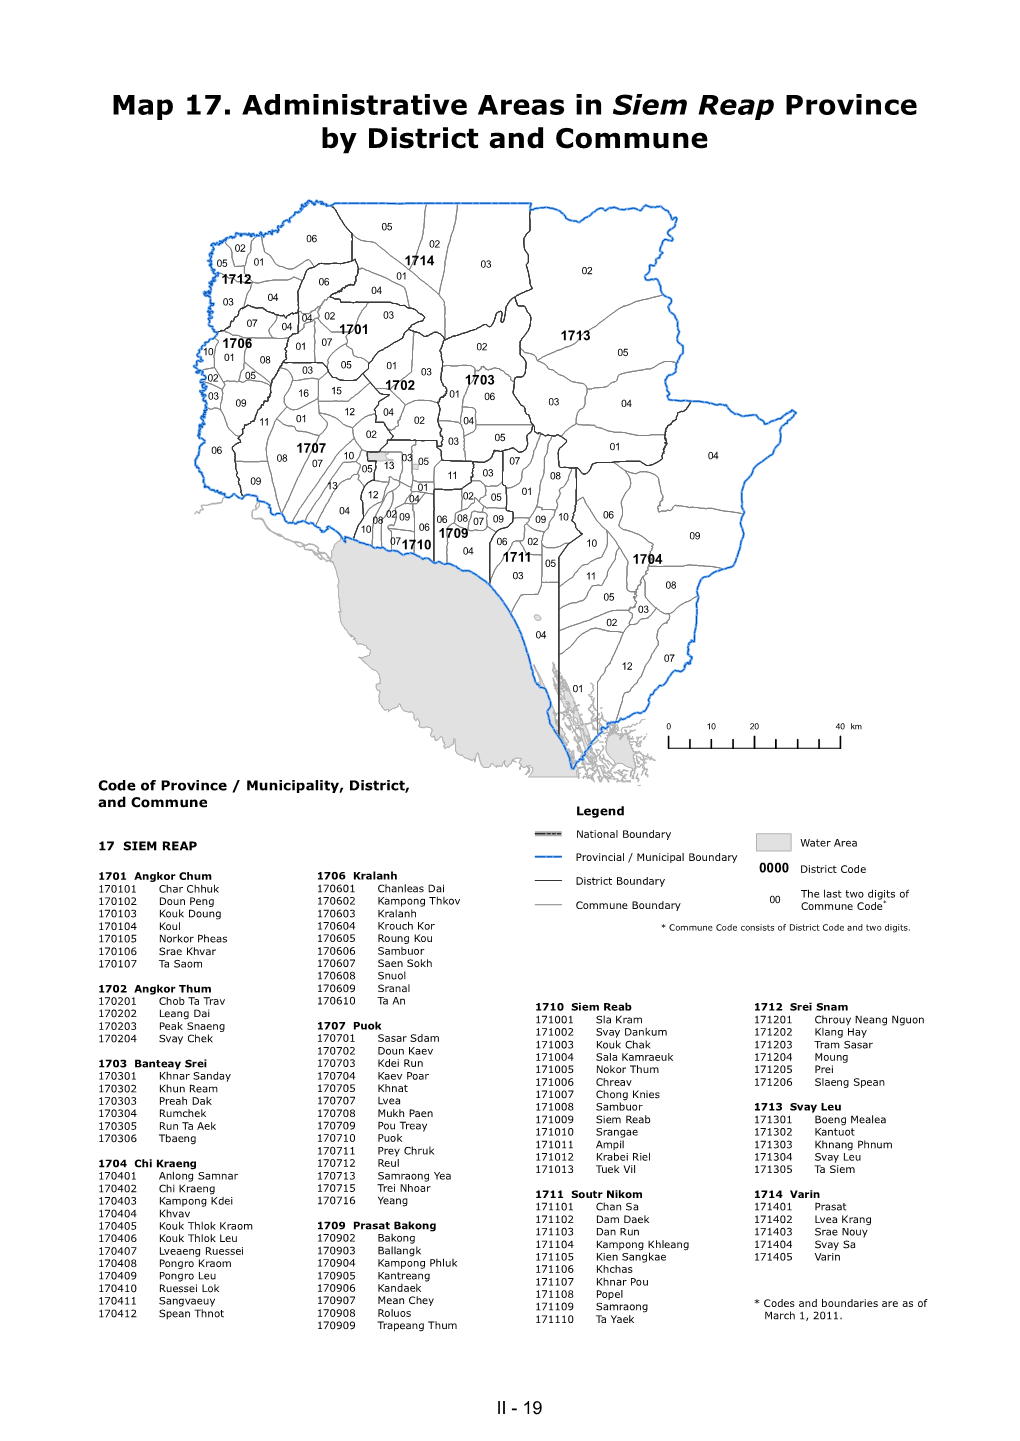 Map 17. Administrative Areas in Siem Reap Province by District and Commune